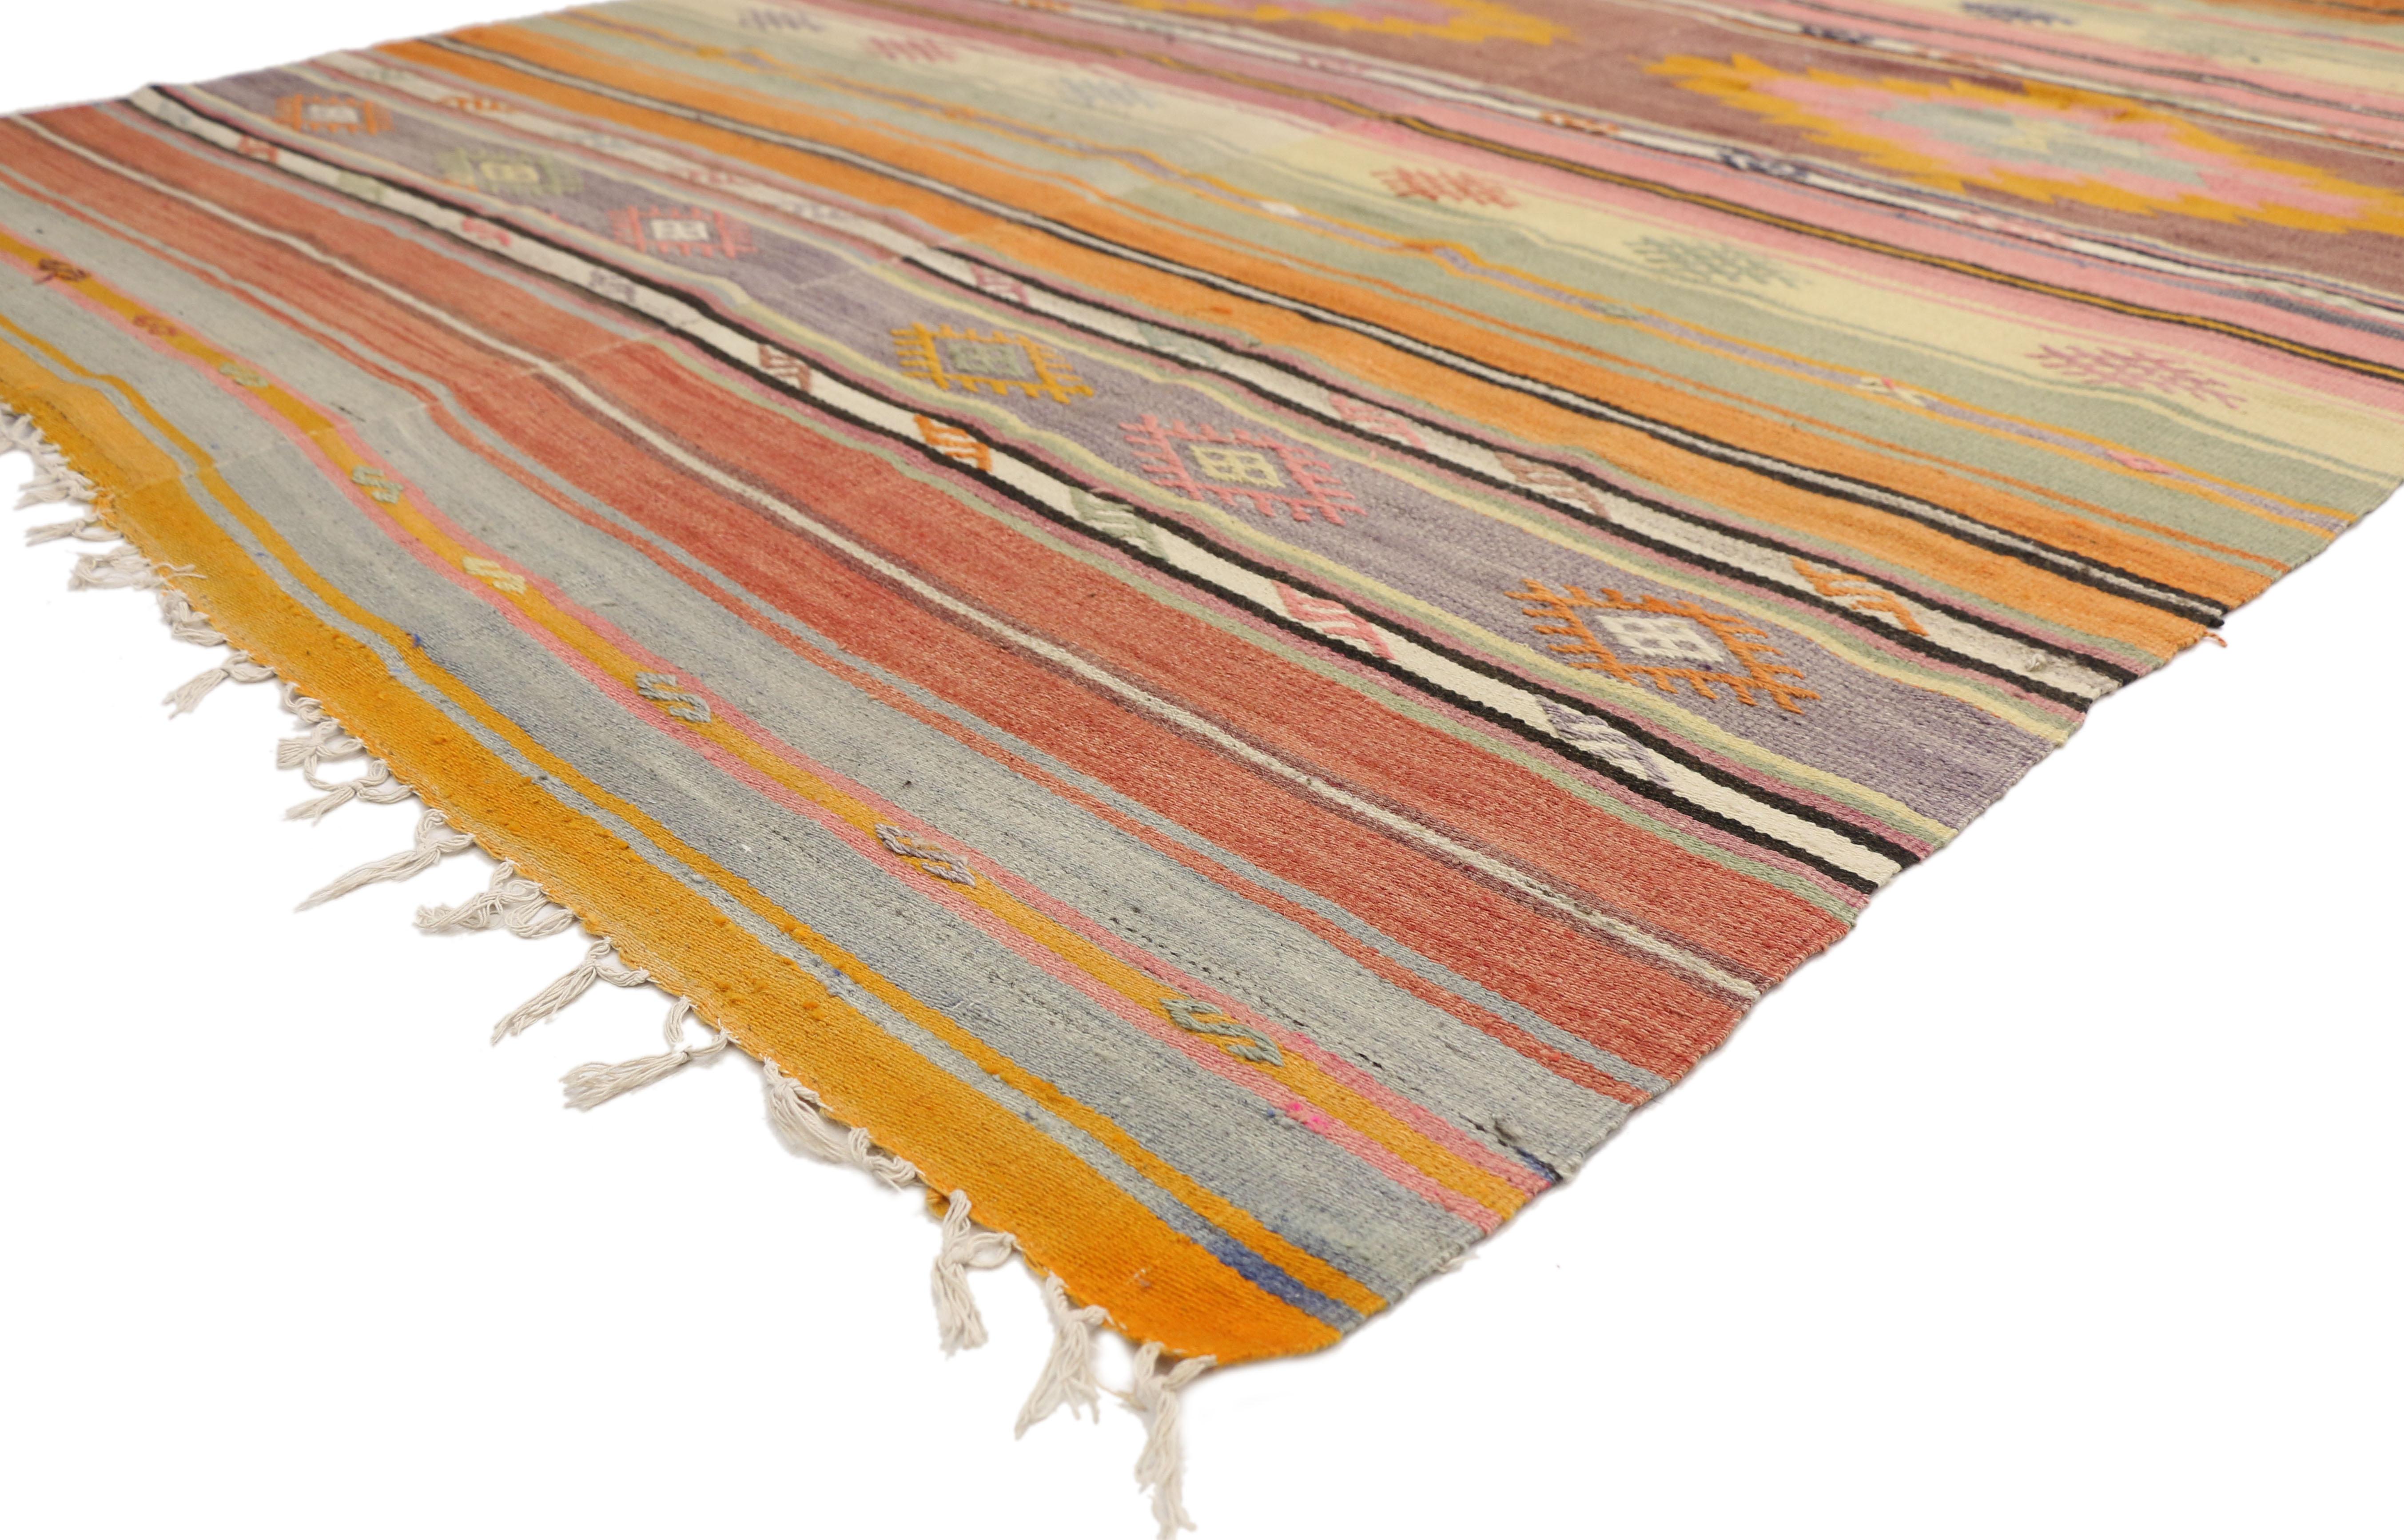 51271, vintage Turkish Kilim rug with Southwest boho chic desert style, flat-weave rug. Measures: 05'06 x 08'09. With bold geometric forms, vibrant colors and Aztec flair, this hand woven wool vintage Turkish Kilim area rug manages to beautifully